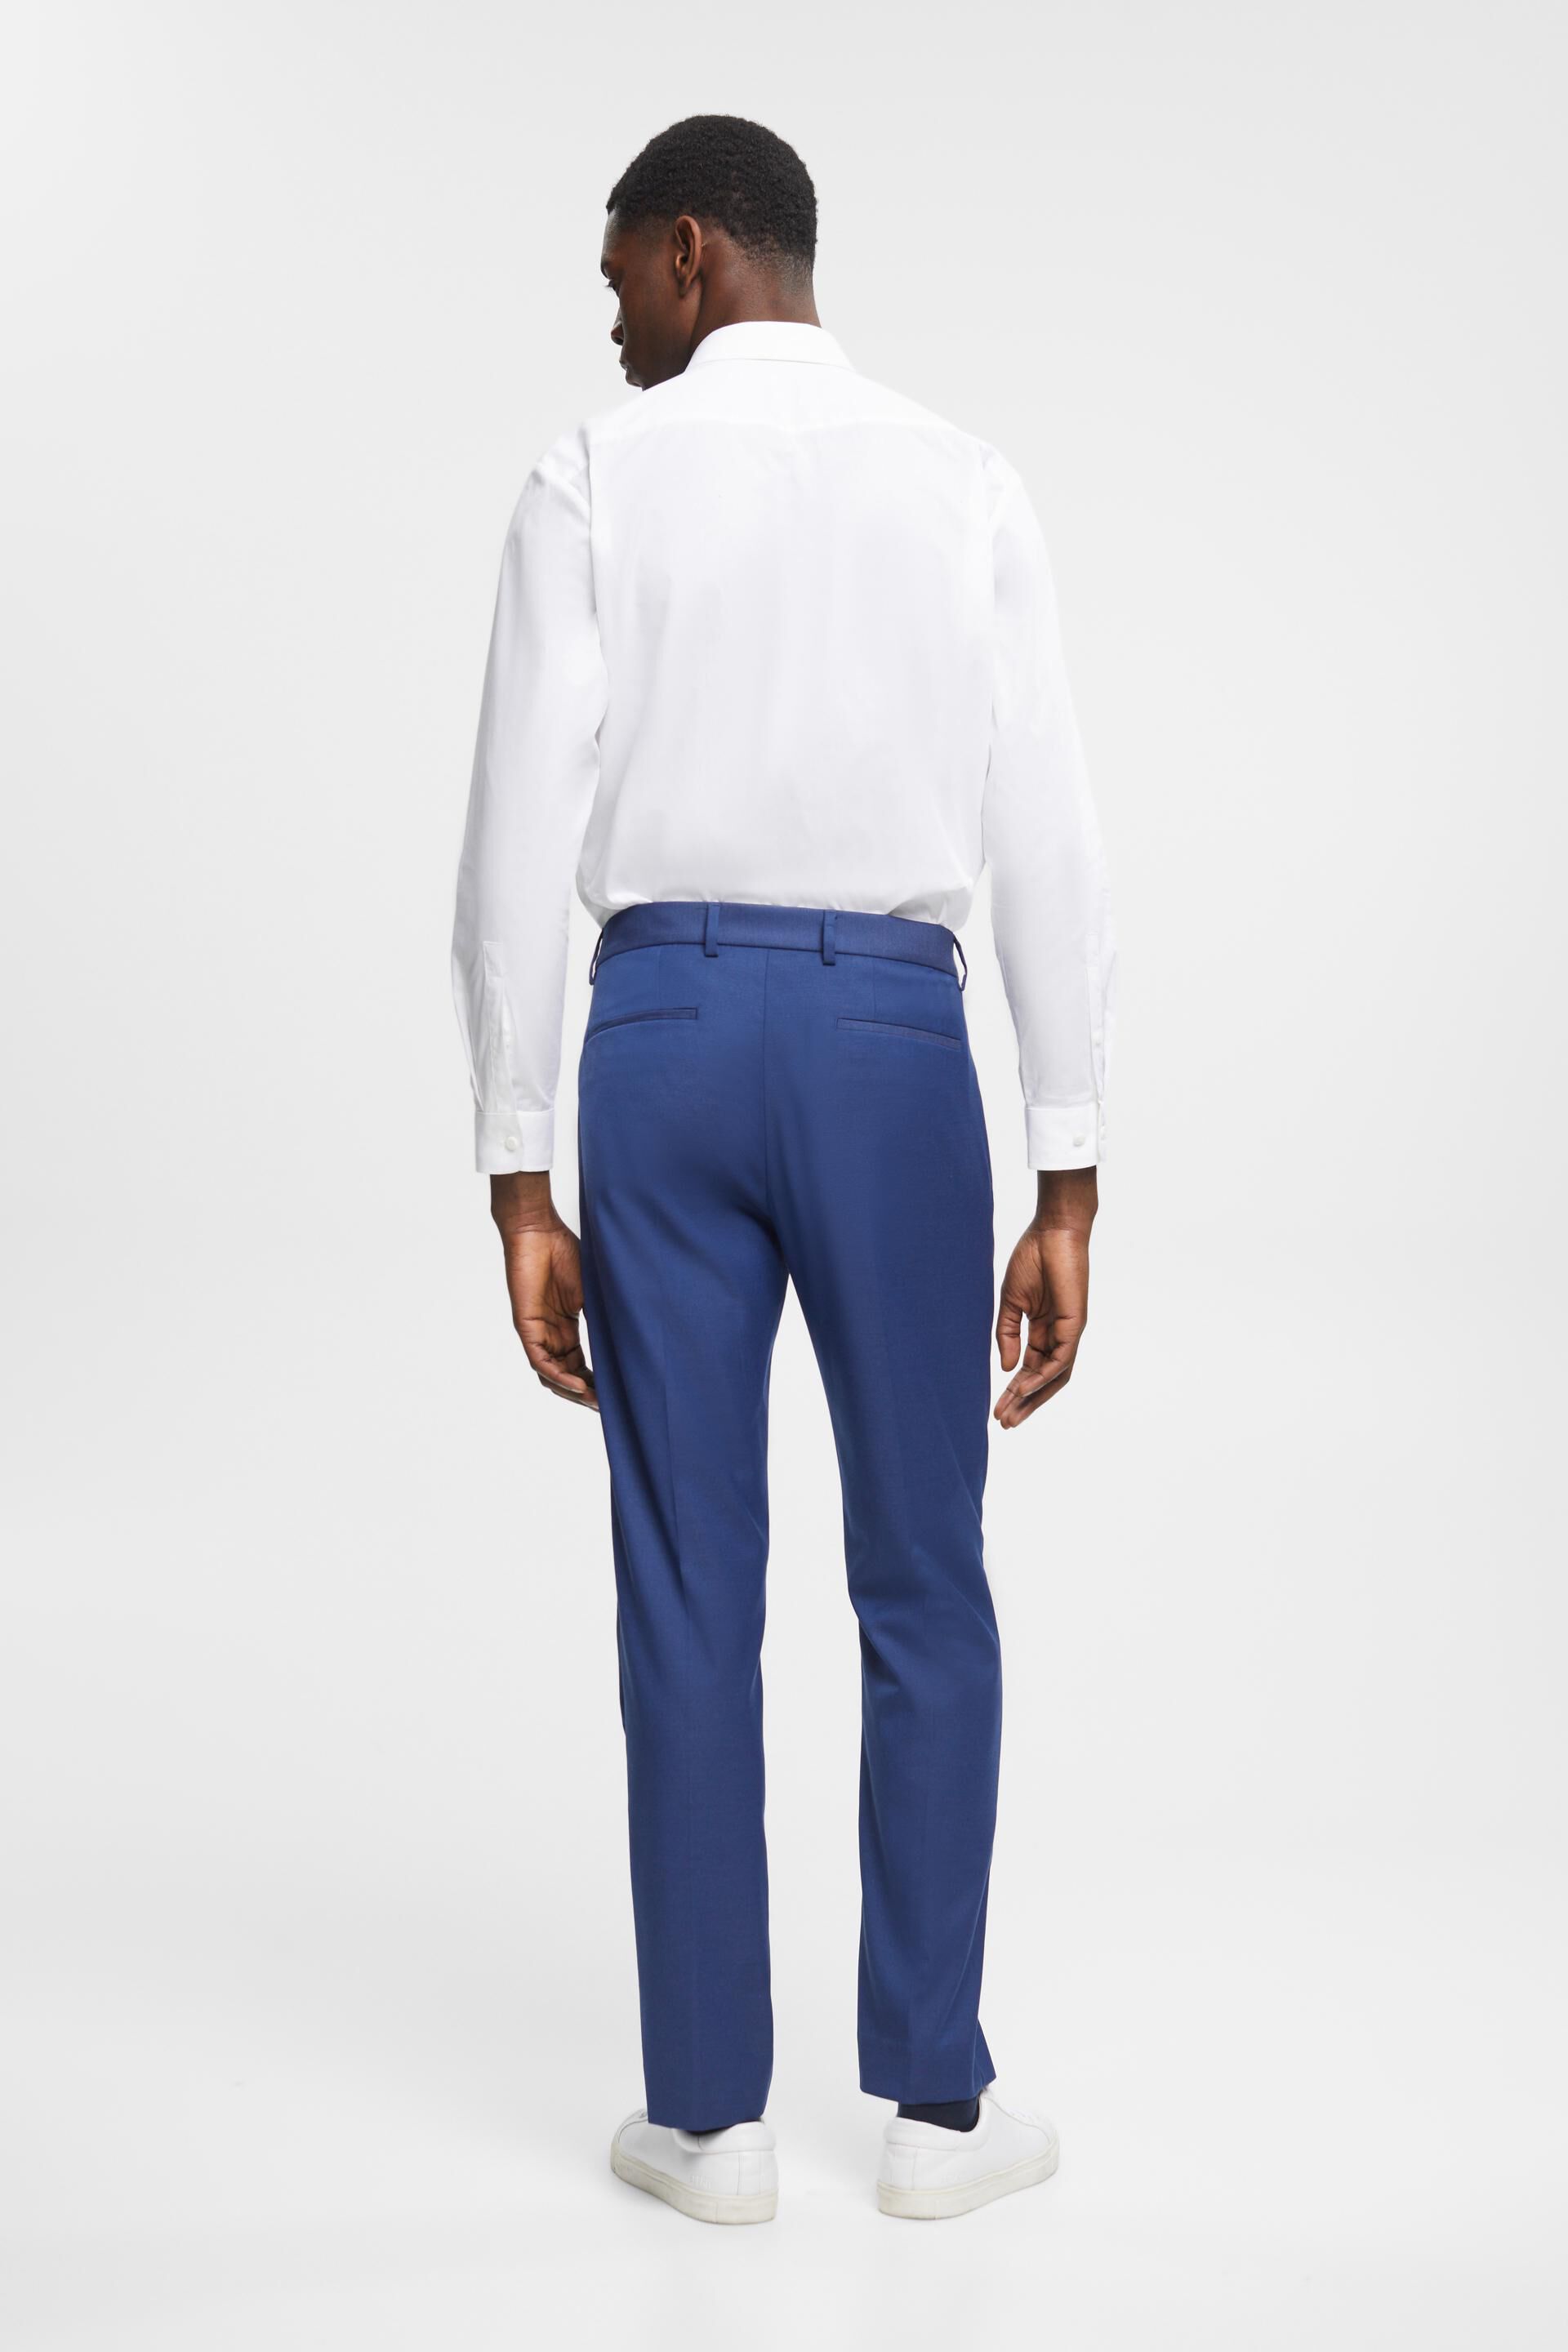 Occasions | Blue Skinny Fit Wedding Trousers | SuitDirect.co.uk